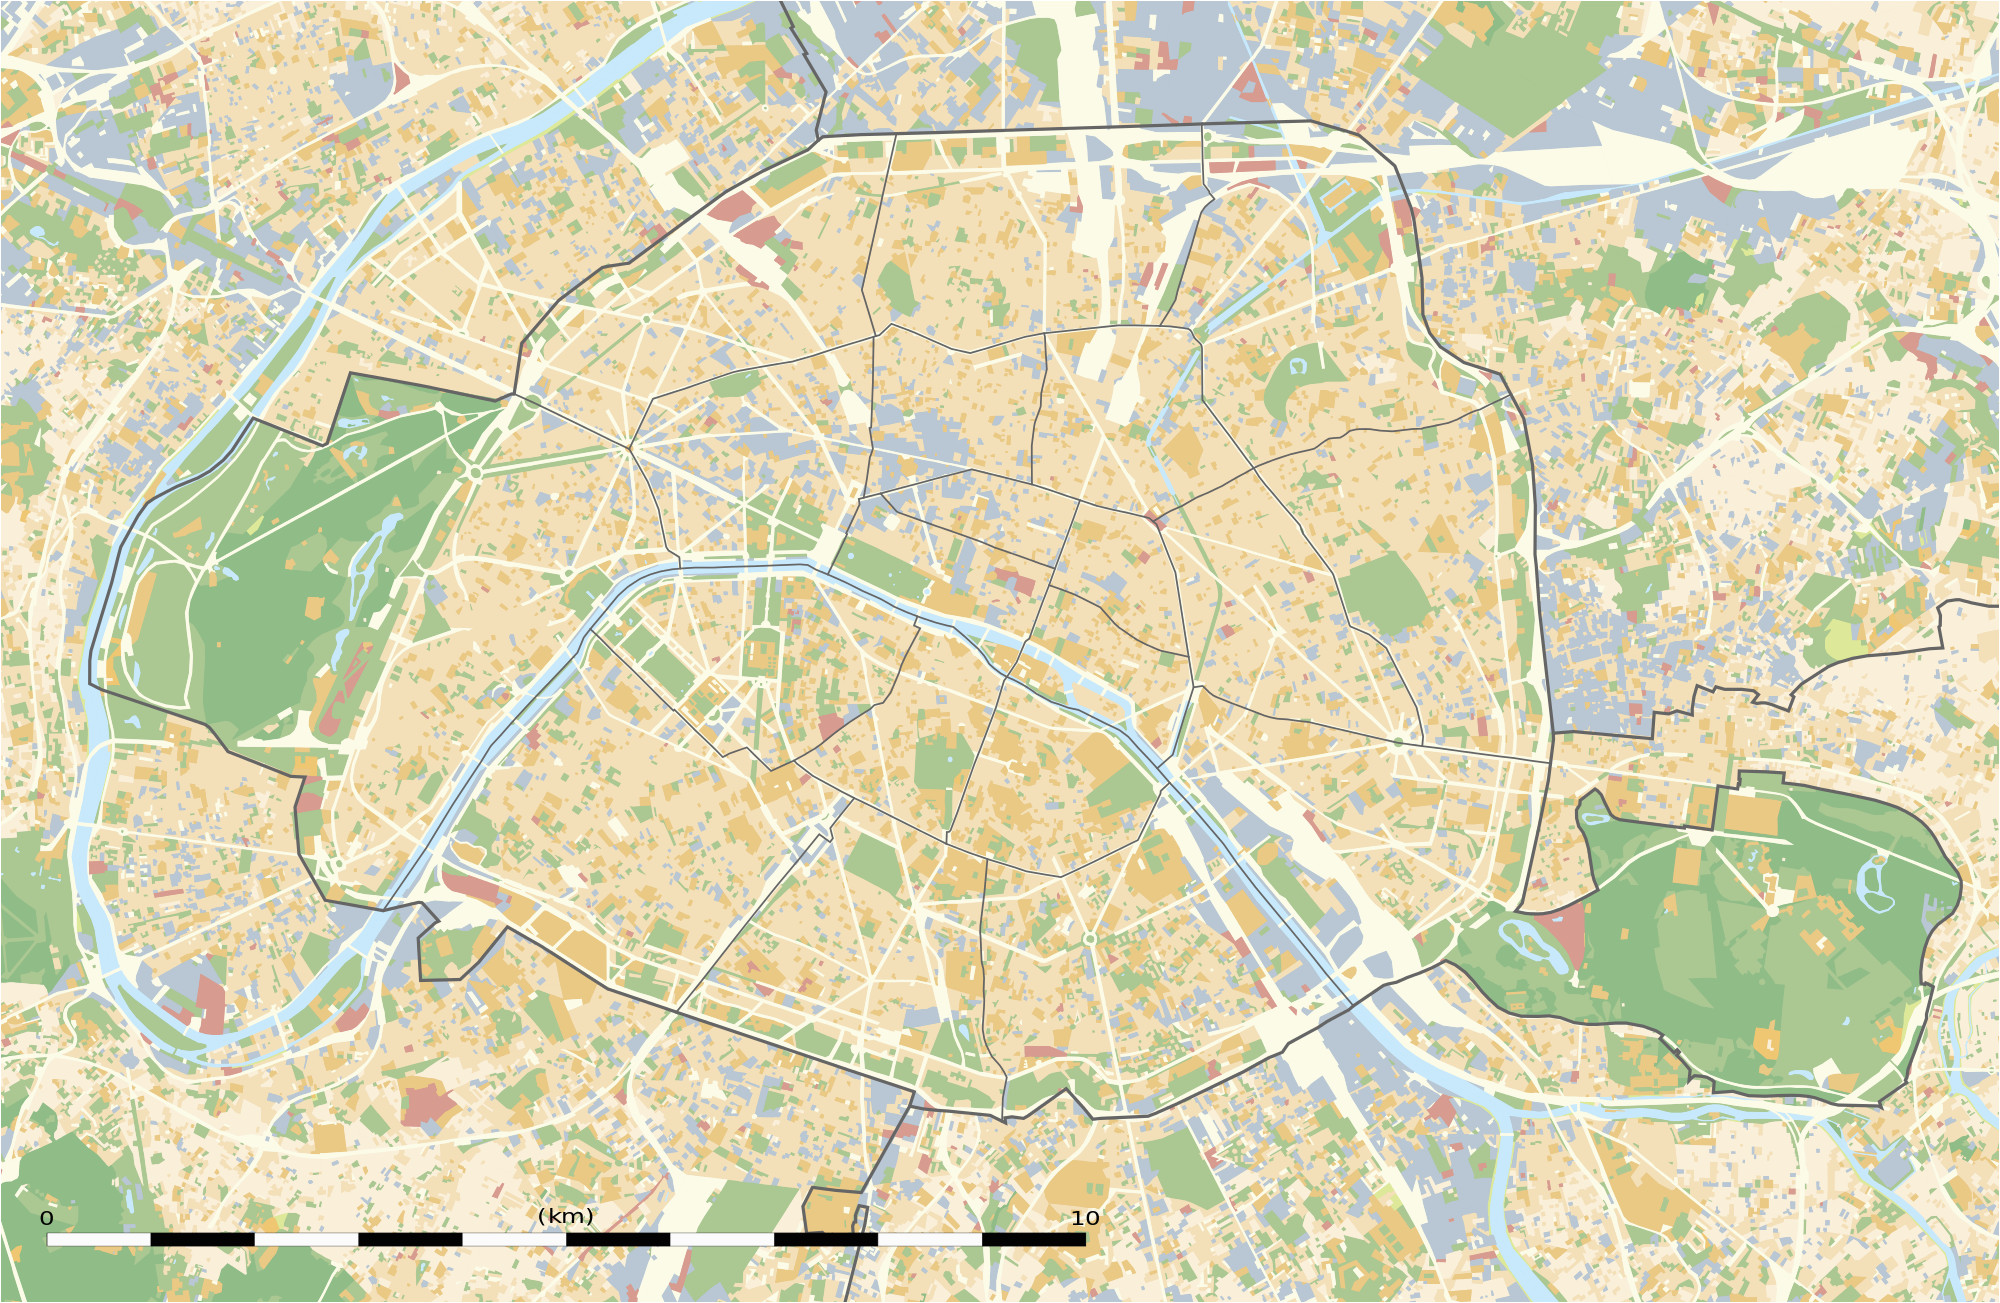 Street Map Of Paris France Printable Maps Of Paris Wikimedia Commons